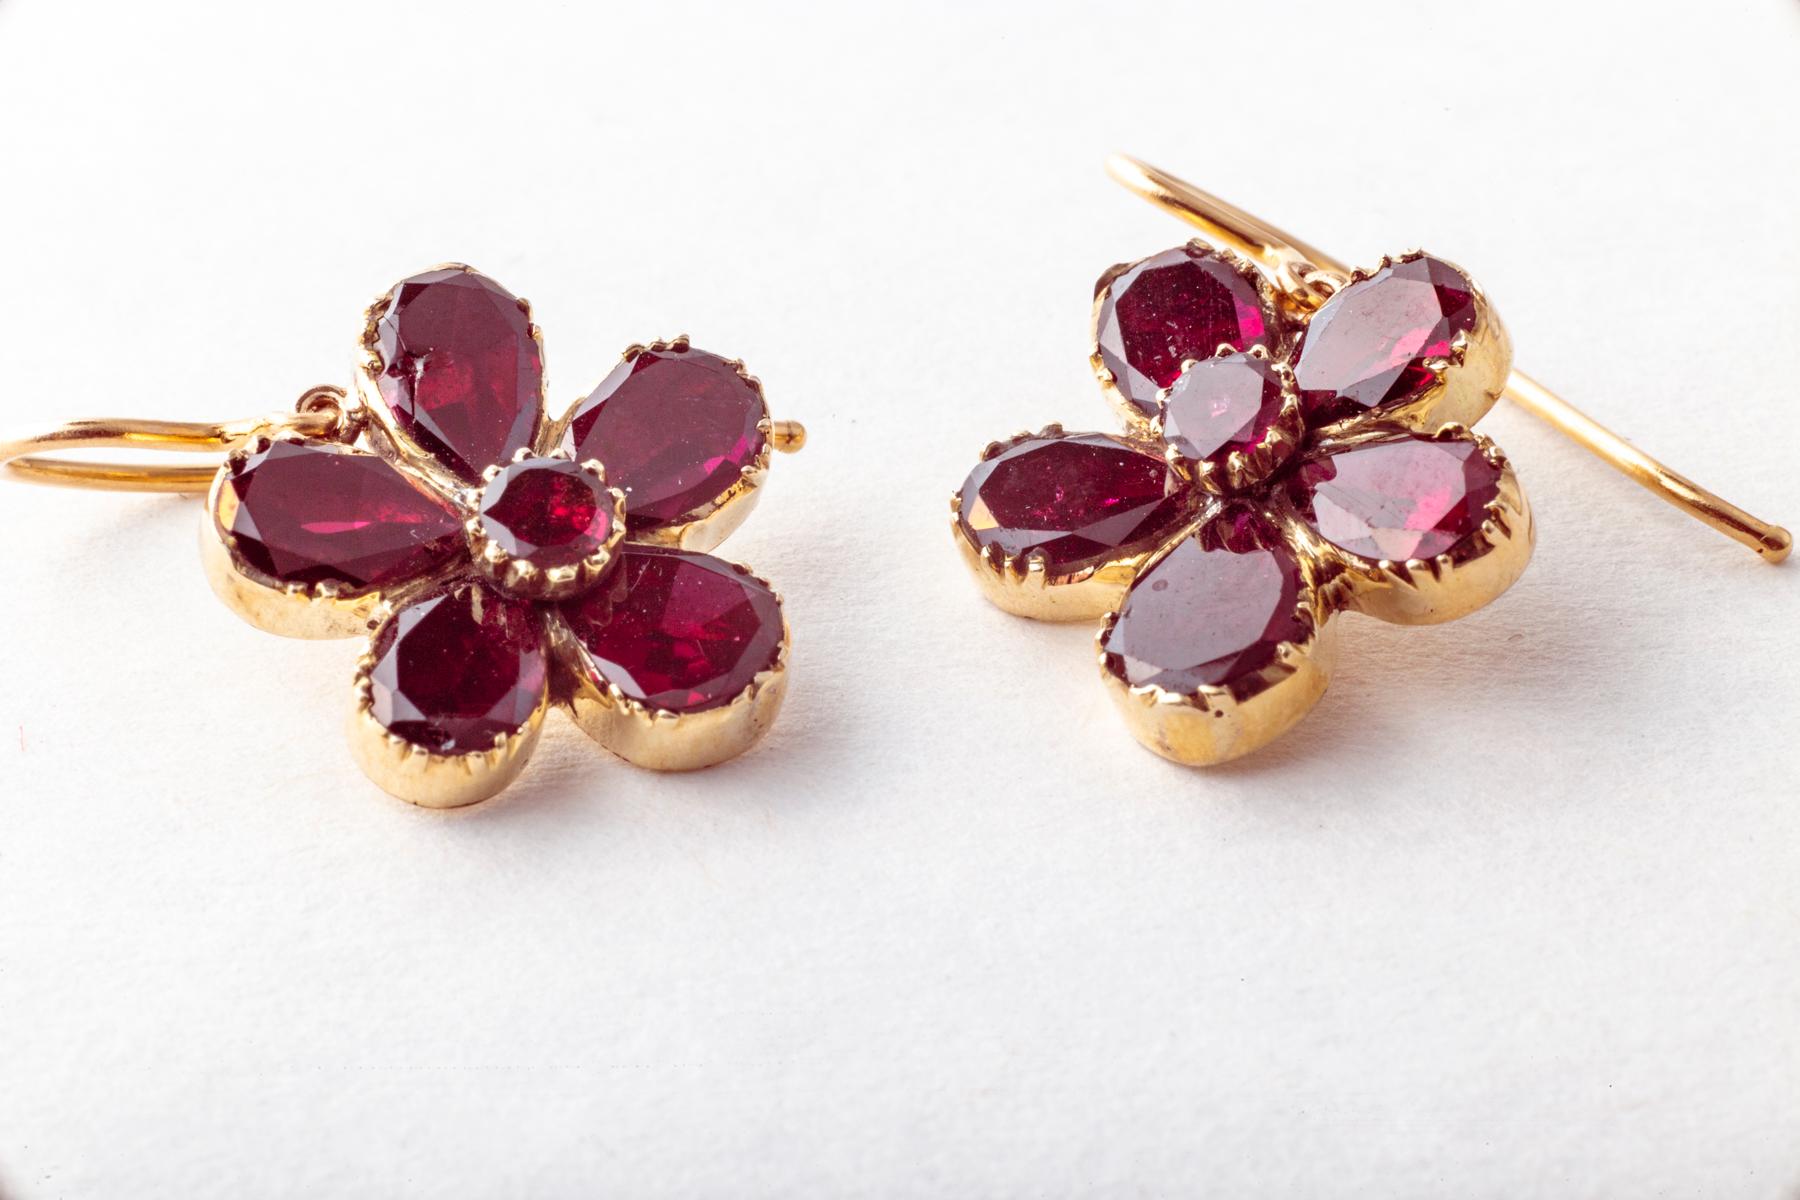 A touch of Georgian garnet color comes to you with these drop earrings from the Georgian era. c. 1820. The are set in 15 kt gold with closed foiled garnets. They would have been daytime jewelry in the Georgian era. Comfortable of course at a